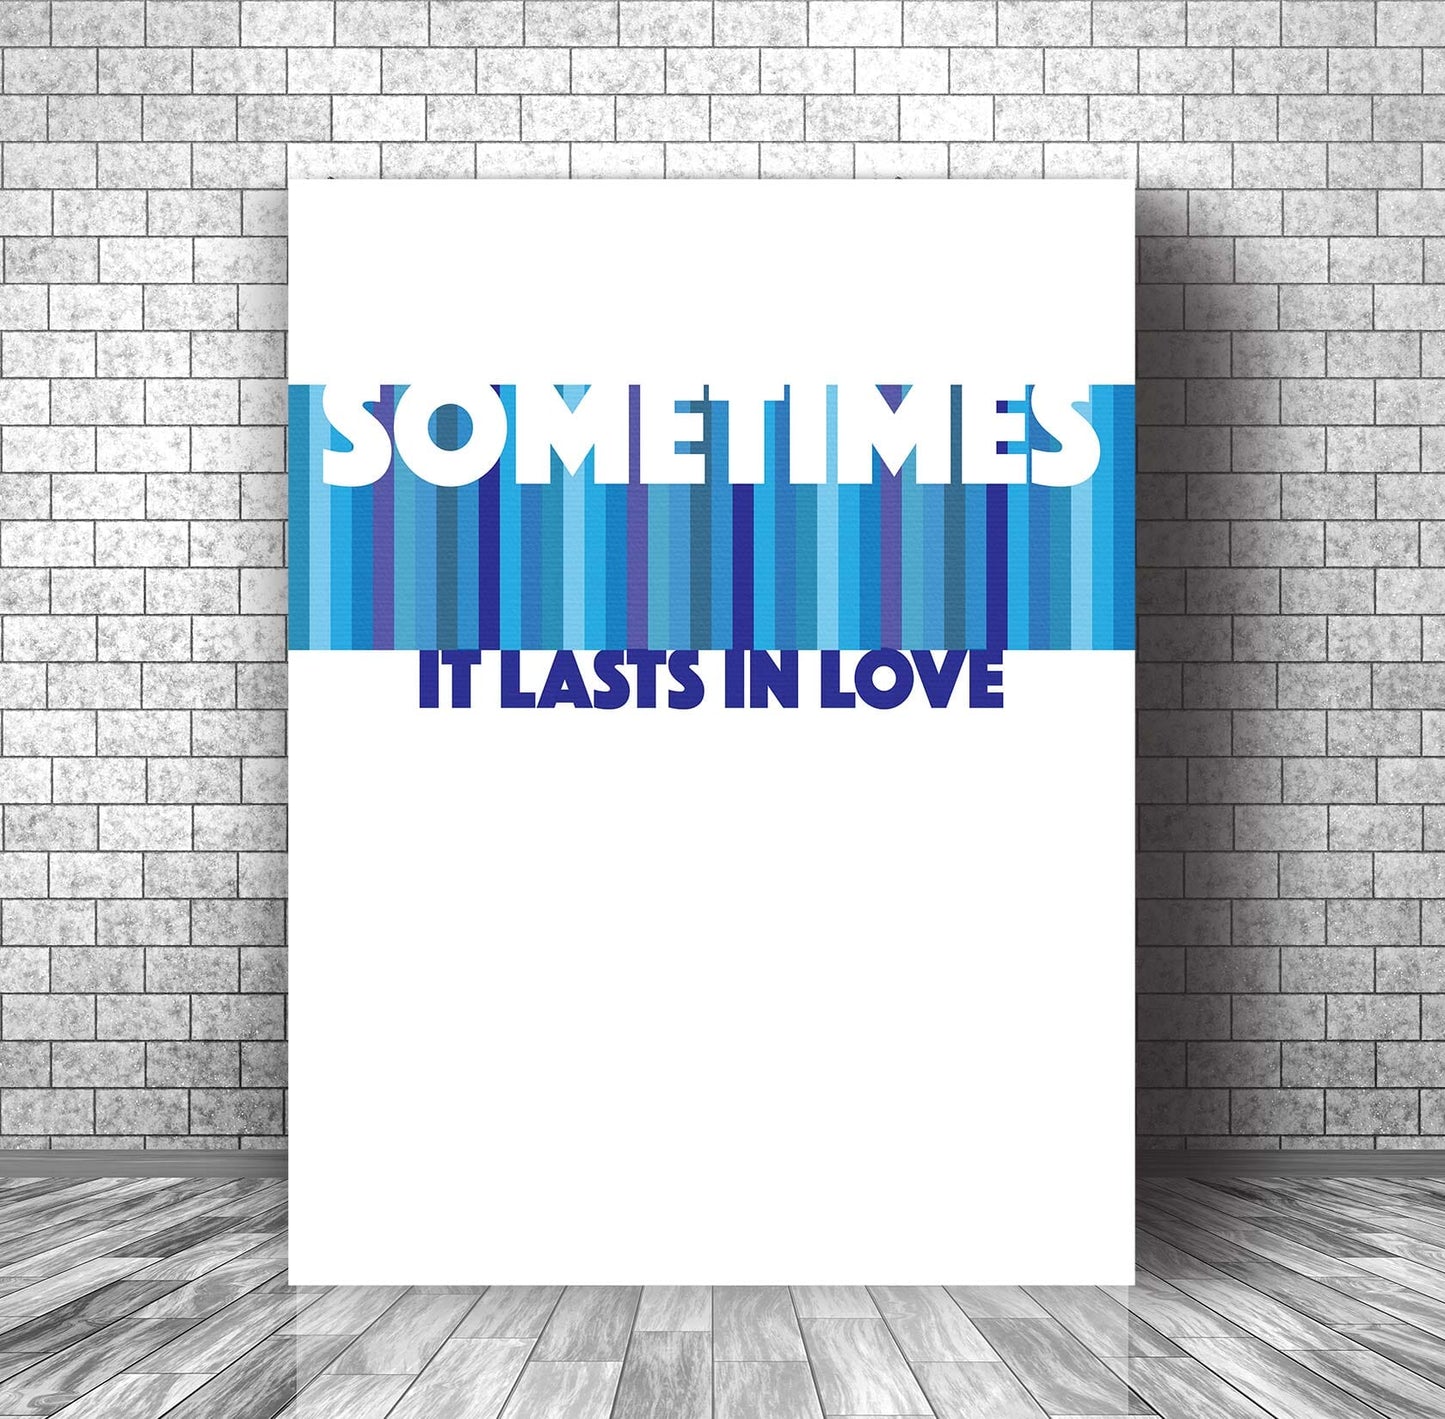 Someone Like You by Adele - Lyric Inspired Love Song Print Song Lyrics Art Song Lyrics Art 11x14 Canvas Wrap 